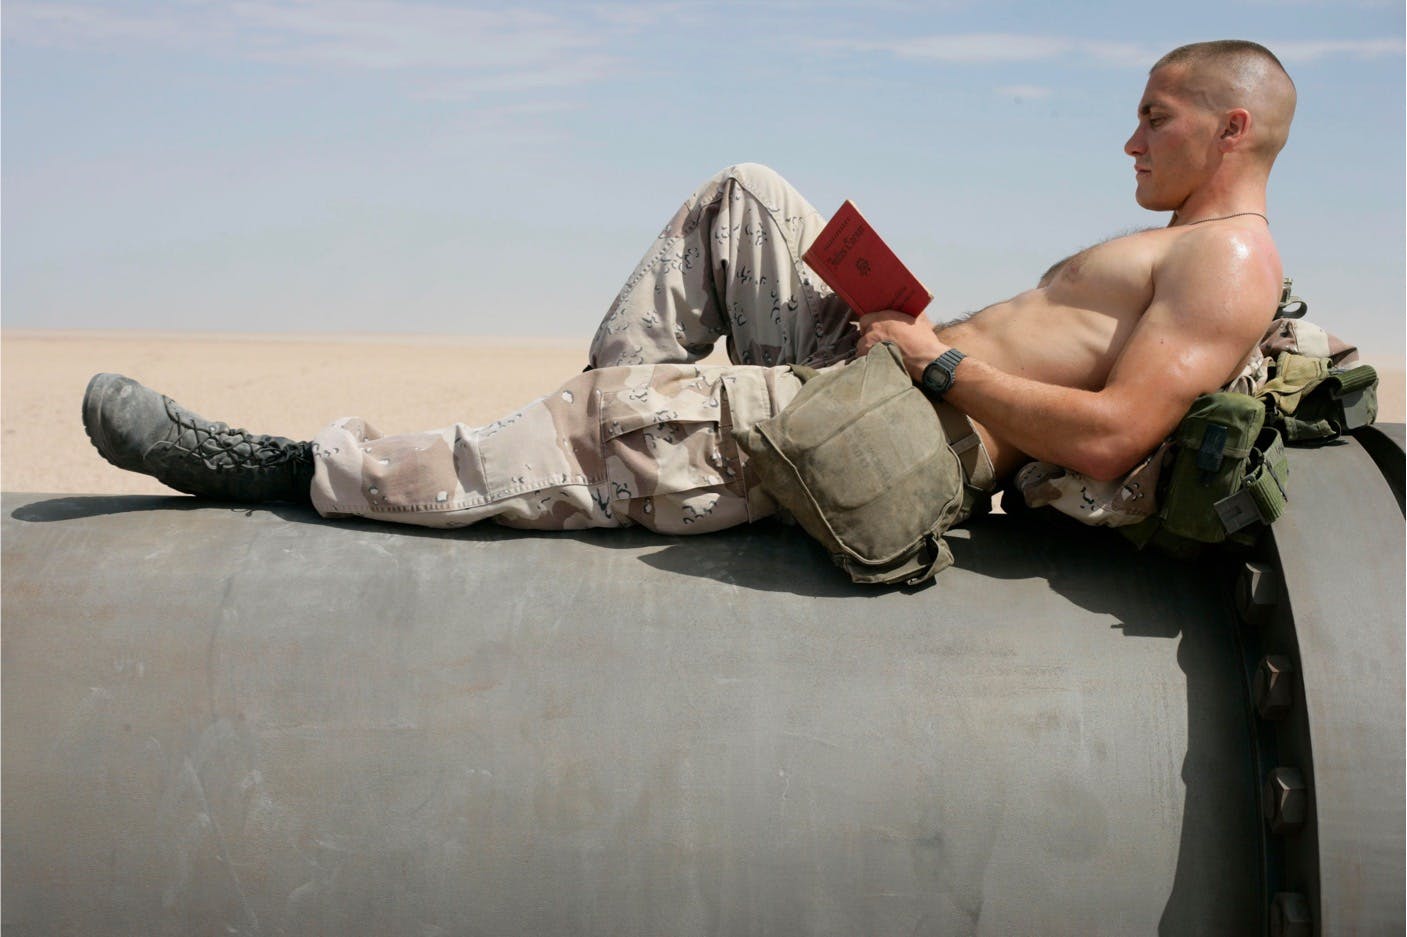 Anthony Swofford (Jack Gyllenhaal) in Jarhead (2005) sits on an army tanker. The profile view gives us a great view of his biceps muscles. He wears no shirt, khaki cargos, and reads a red book.